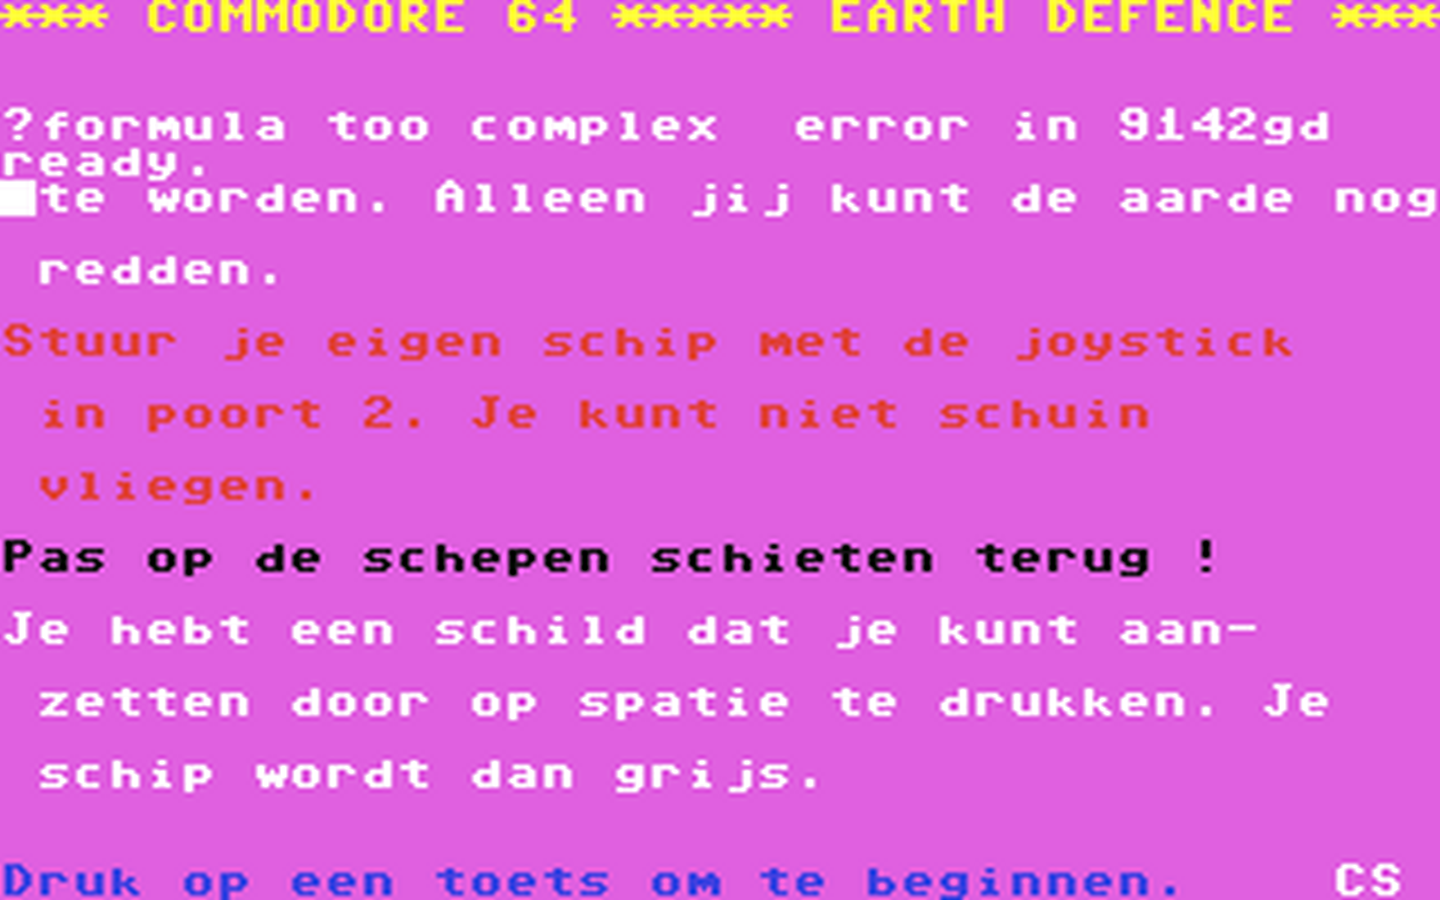 C64 GameBase Earth_Defence Courbois_Software 1983